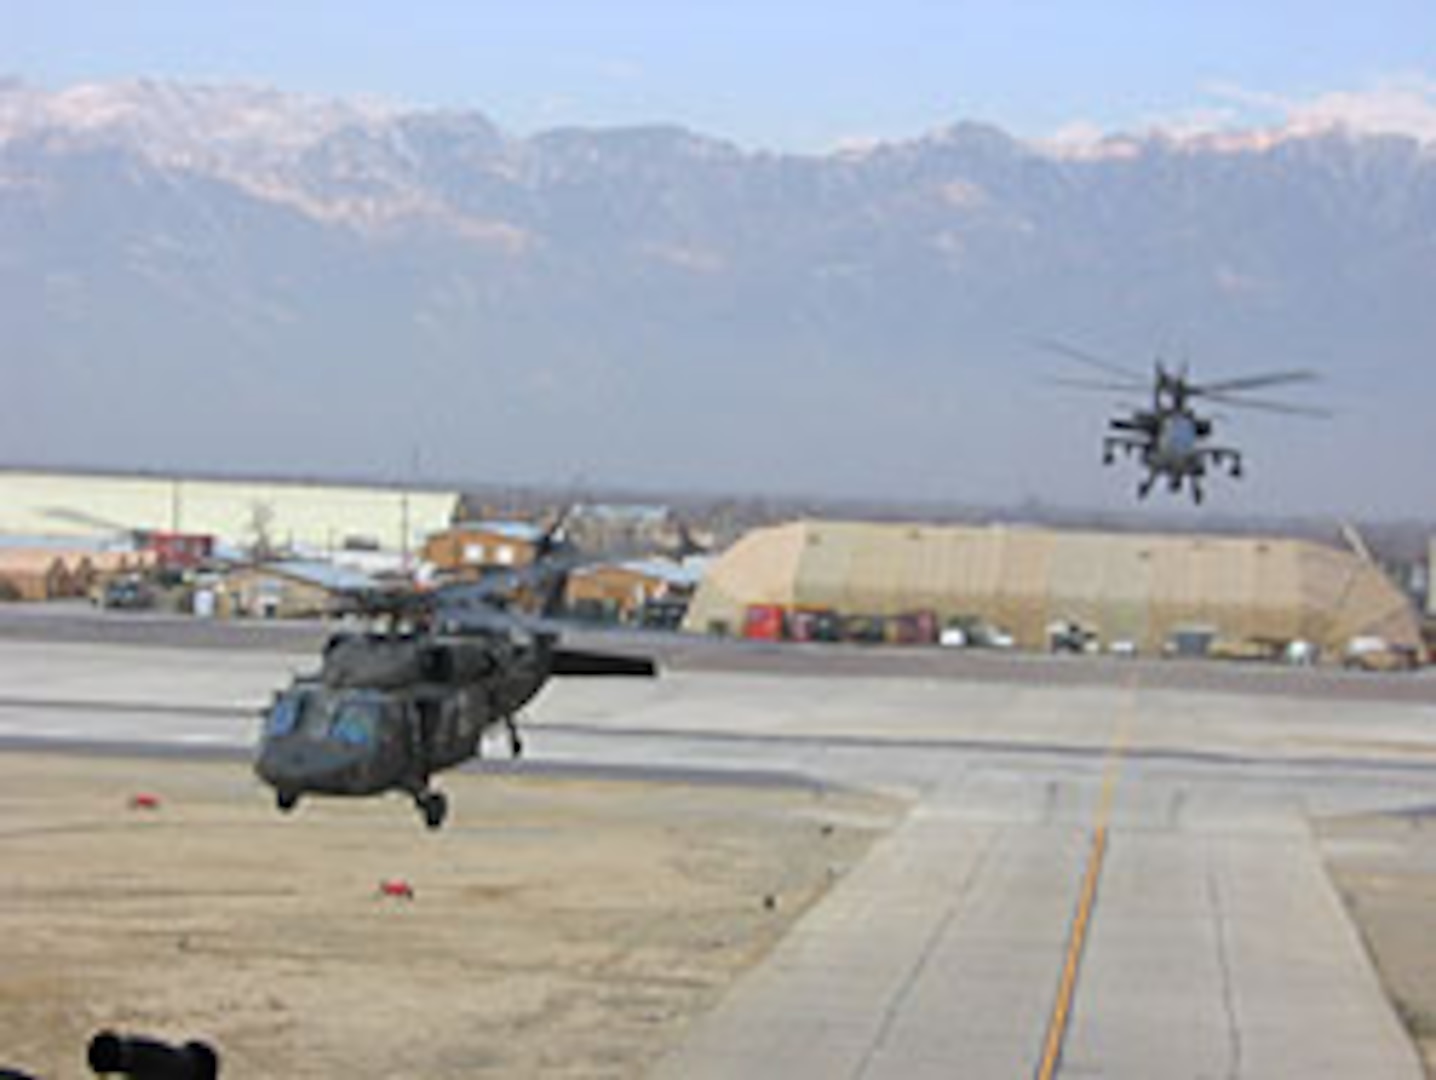 AH-64 Apache helicopters from the 10th Combat Aviation Brigade (Task Force Falcon) take off in Afghanistan. The unit is in the midst of yet another major offensive against Taliban insurgents. It's providing aerial support for Operation Mountain Fury, which took place Sept. 16.